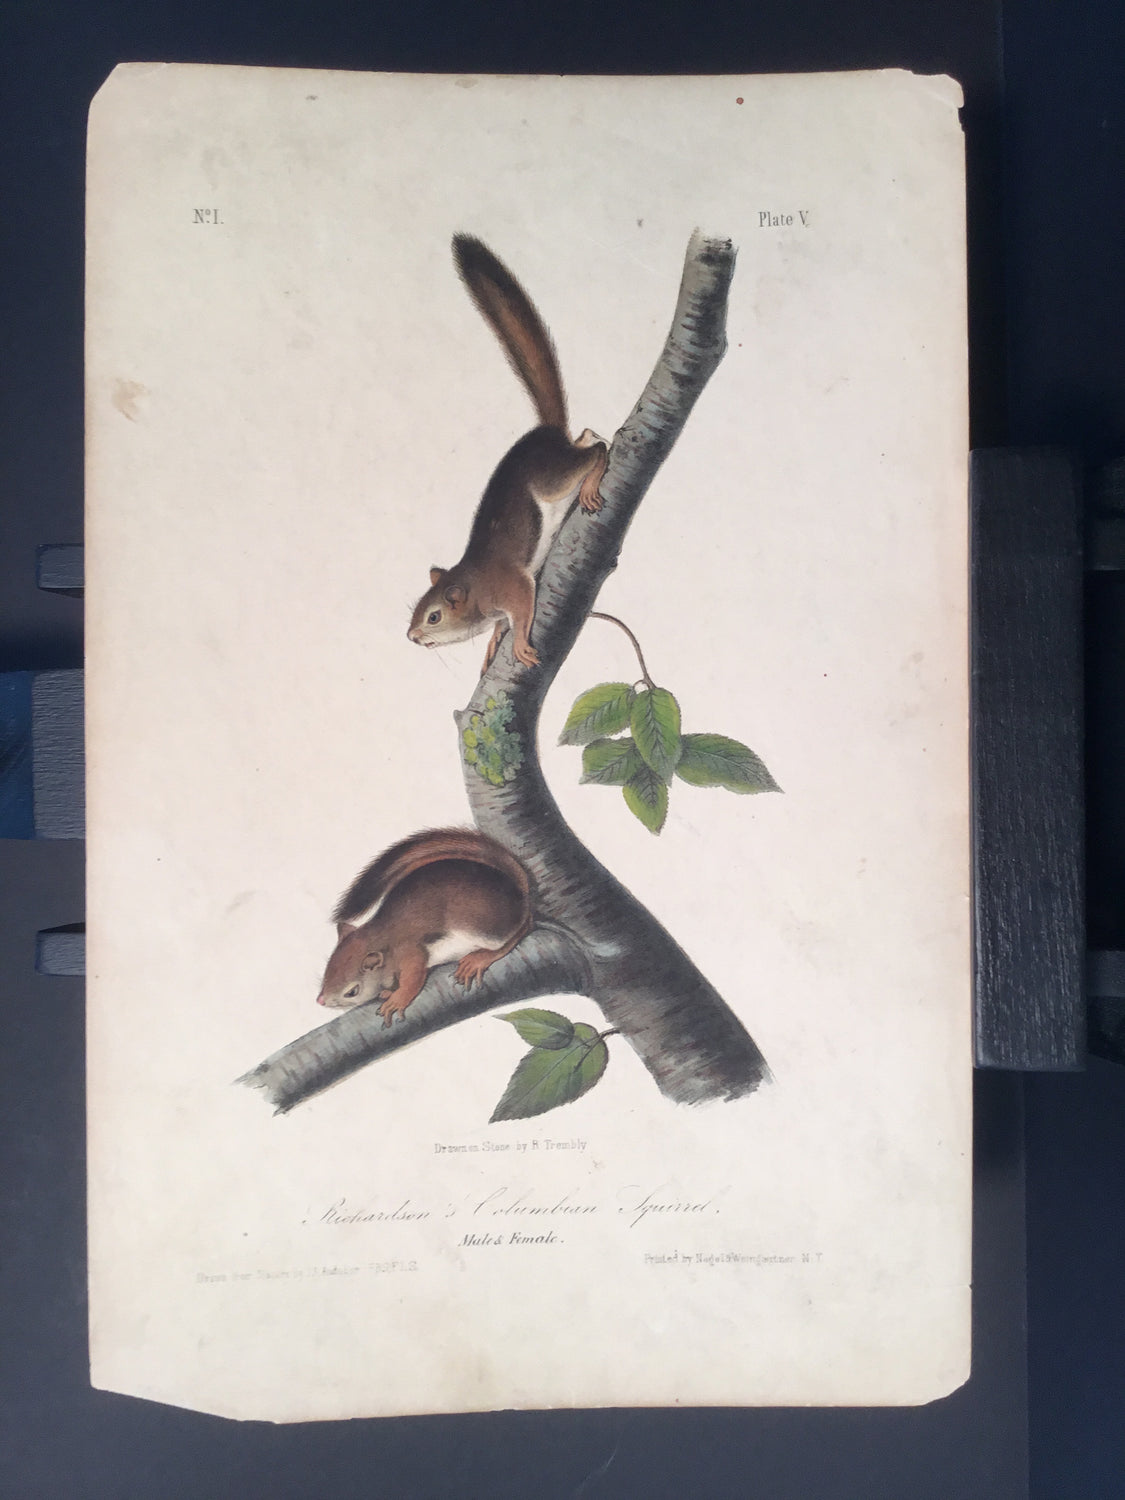 Lord-Hopkins Collection - Richardson’s Columbian Squirrel